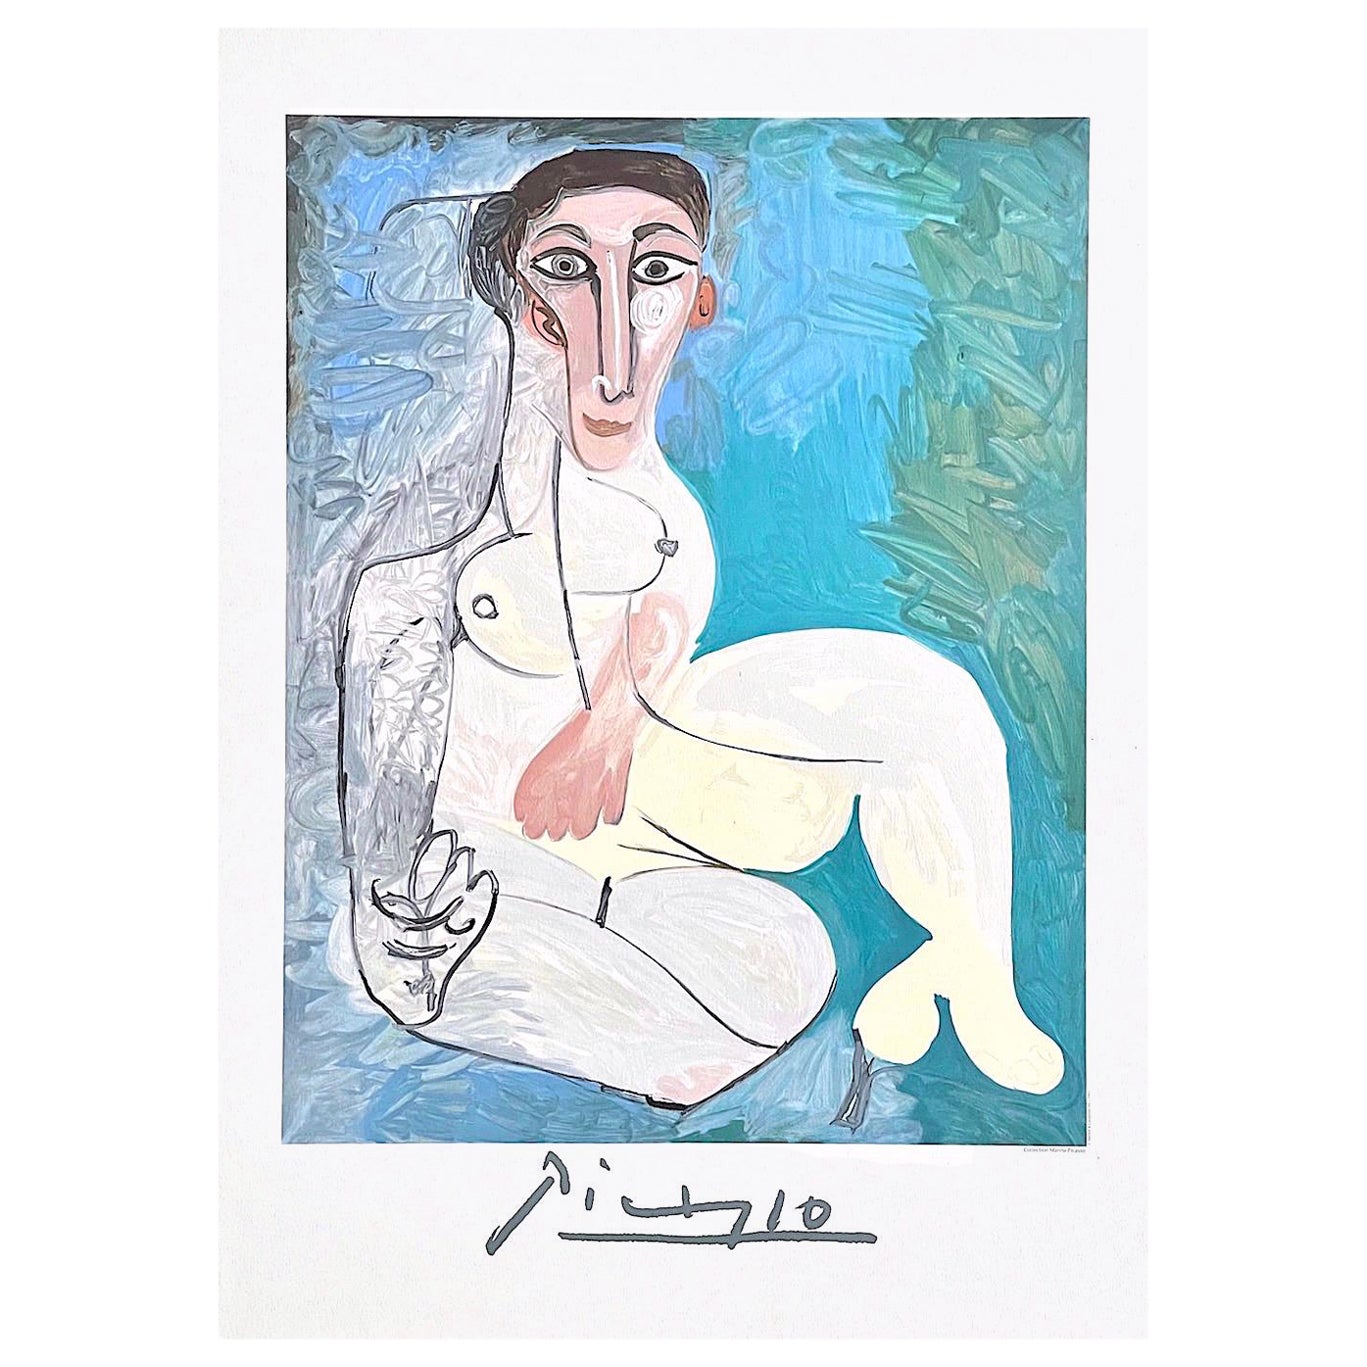 (after) Pablo Picasso Nude Print - Femme Nu Assise dans l'herbe, Lithograph, Abstract Seated Nude, Aqua, Pink, Gray